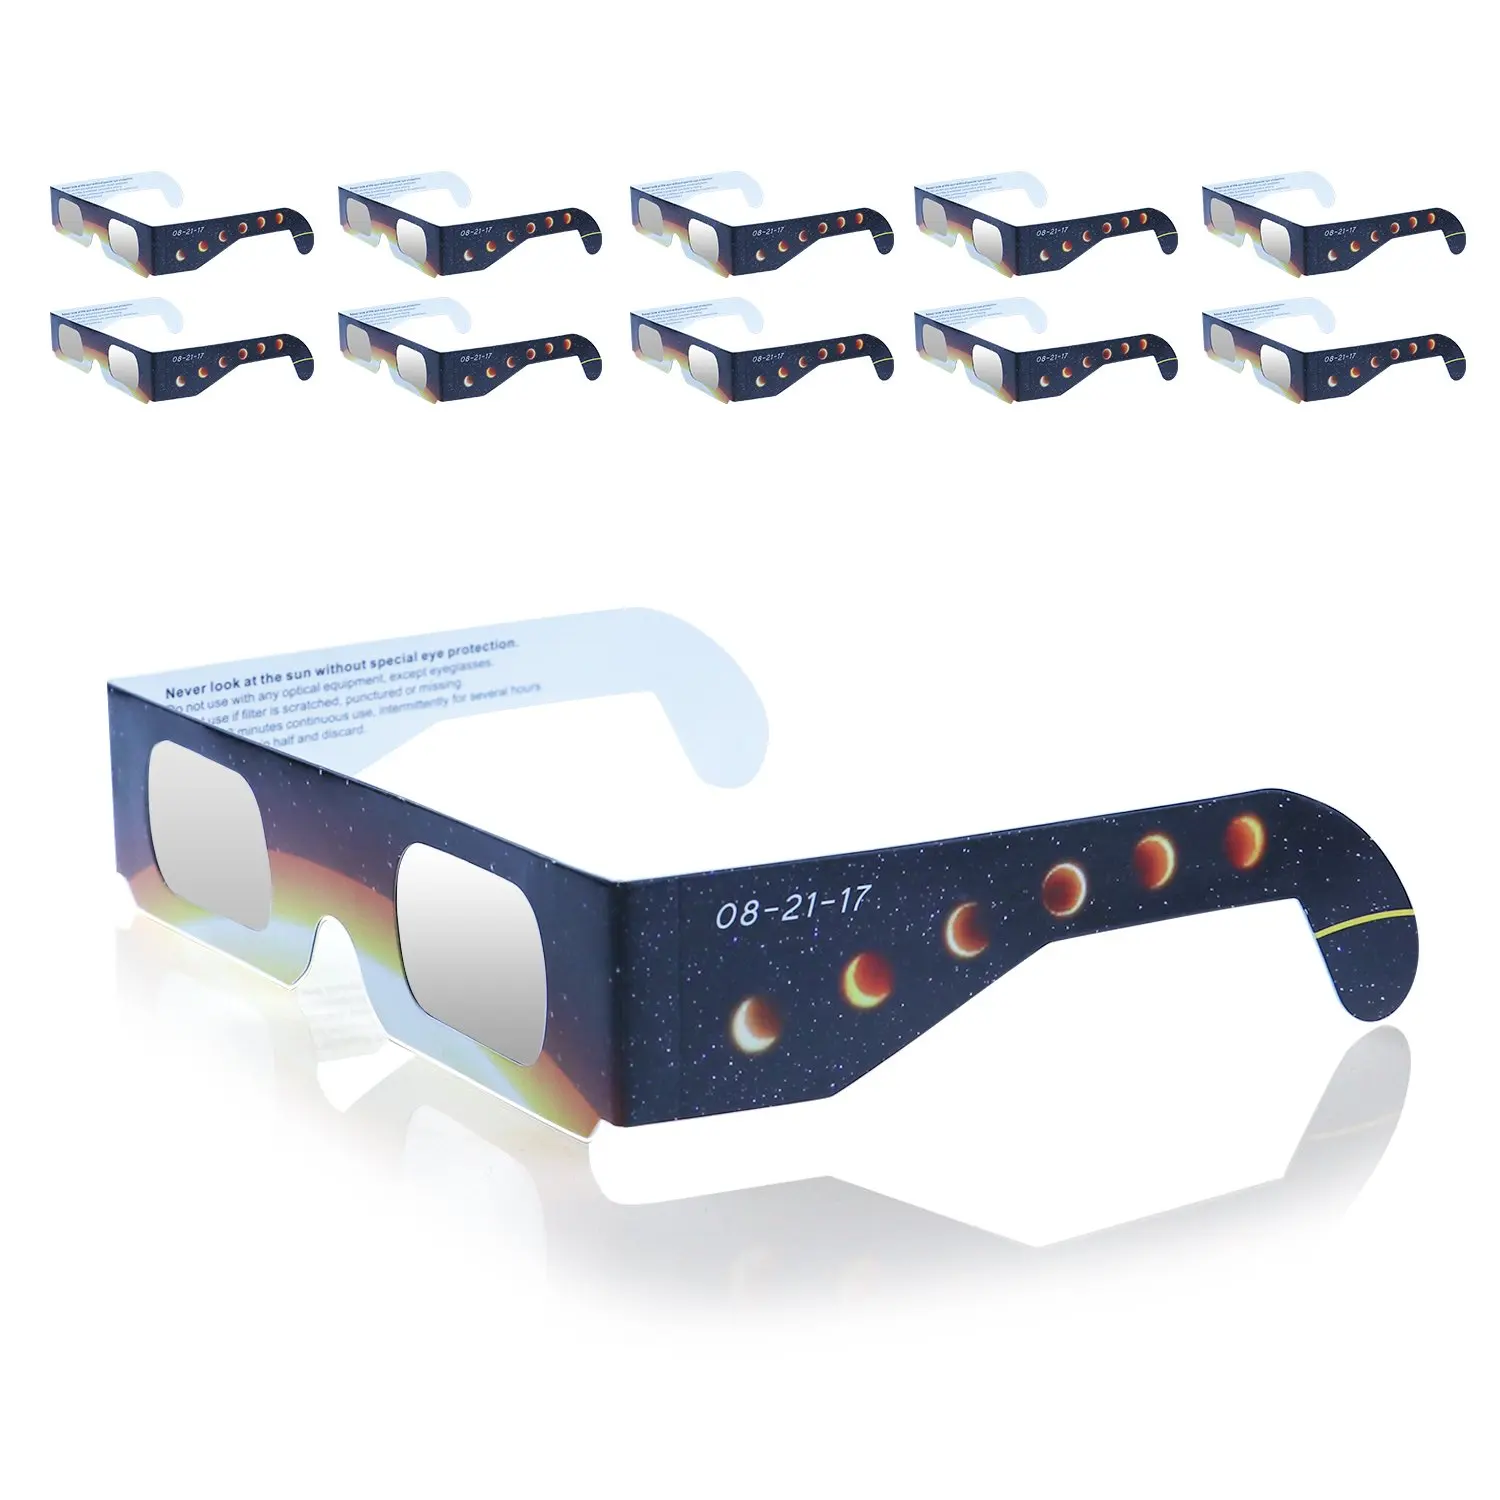 Buy Eclipse Glasses, ZonTech[10 Pack] Solar Eclipse Glasses Safety